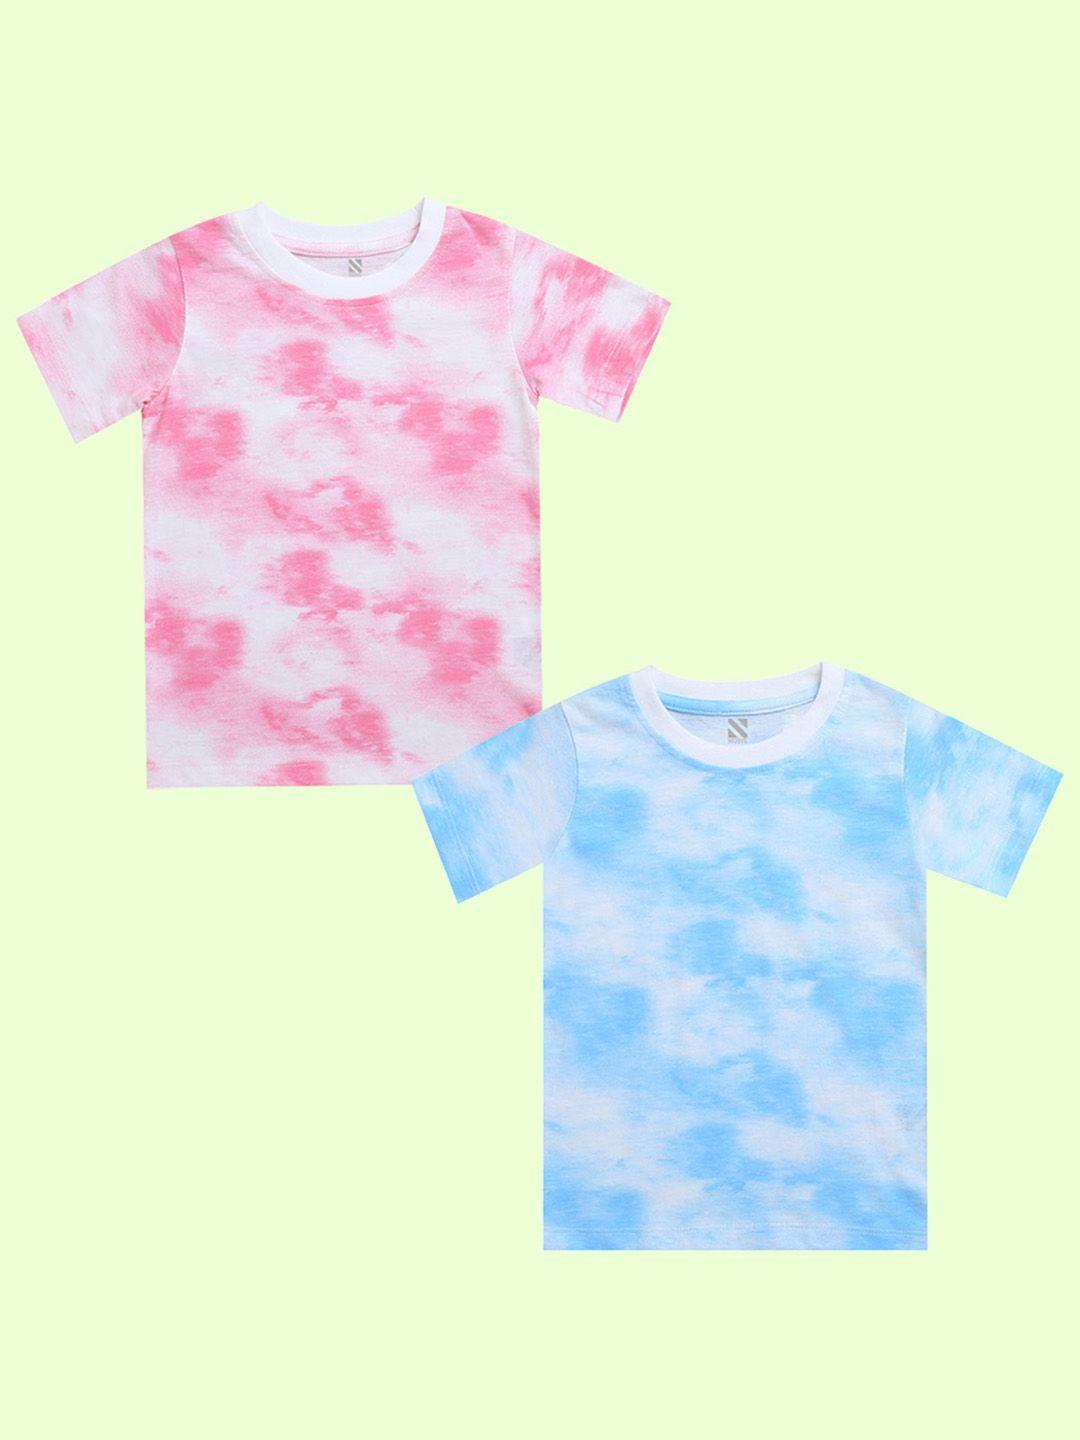 nusyl kids pack of 2 tie and dye t-shirt